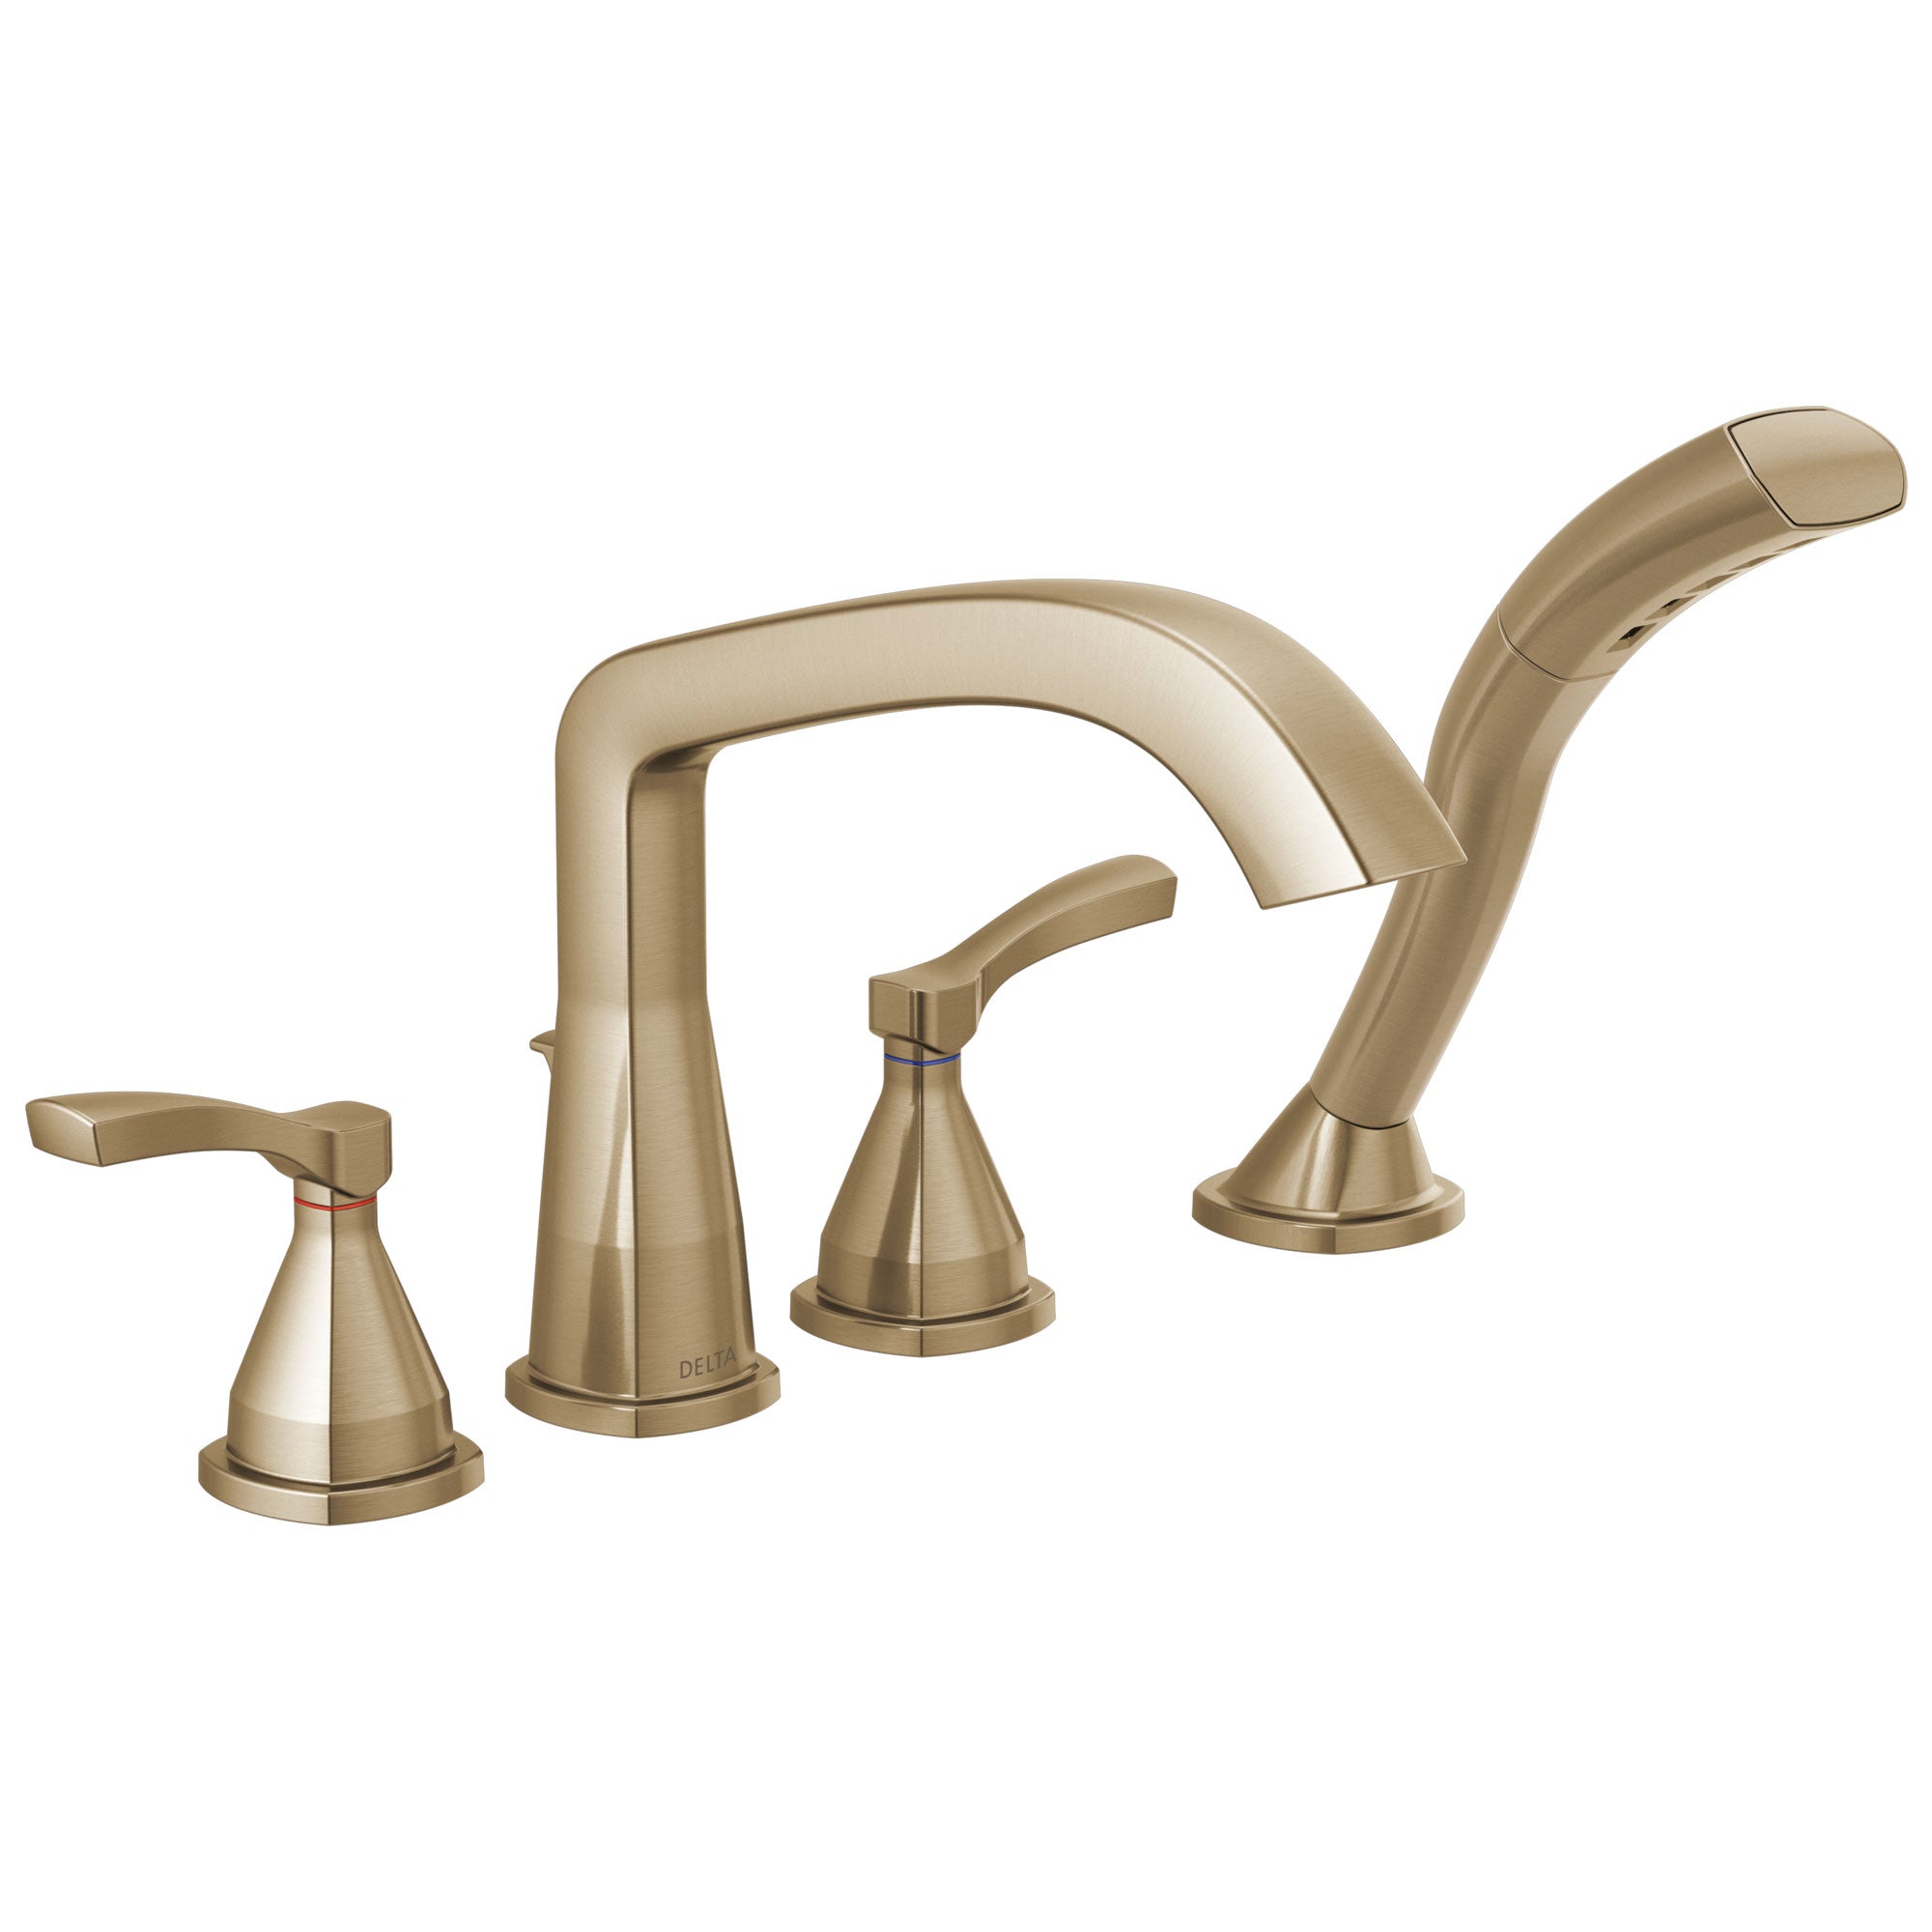 Delta Stryke Champagne Bronze Finish Deck Mount Roman Tub Filler Faucet with Hand Shower Includes Rough-in Valve and Lever Handles D3038V